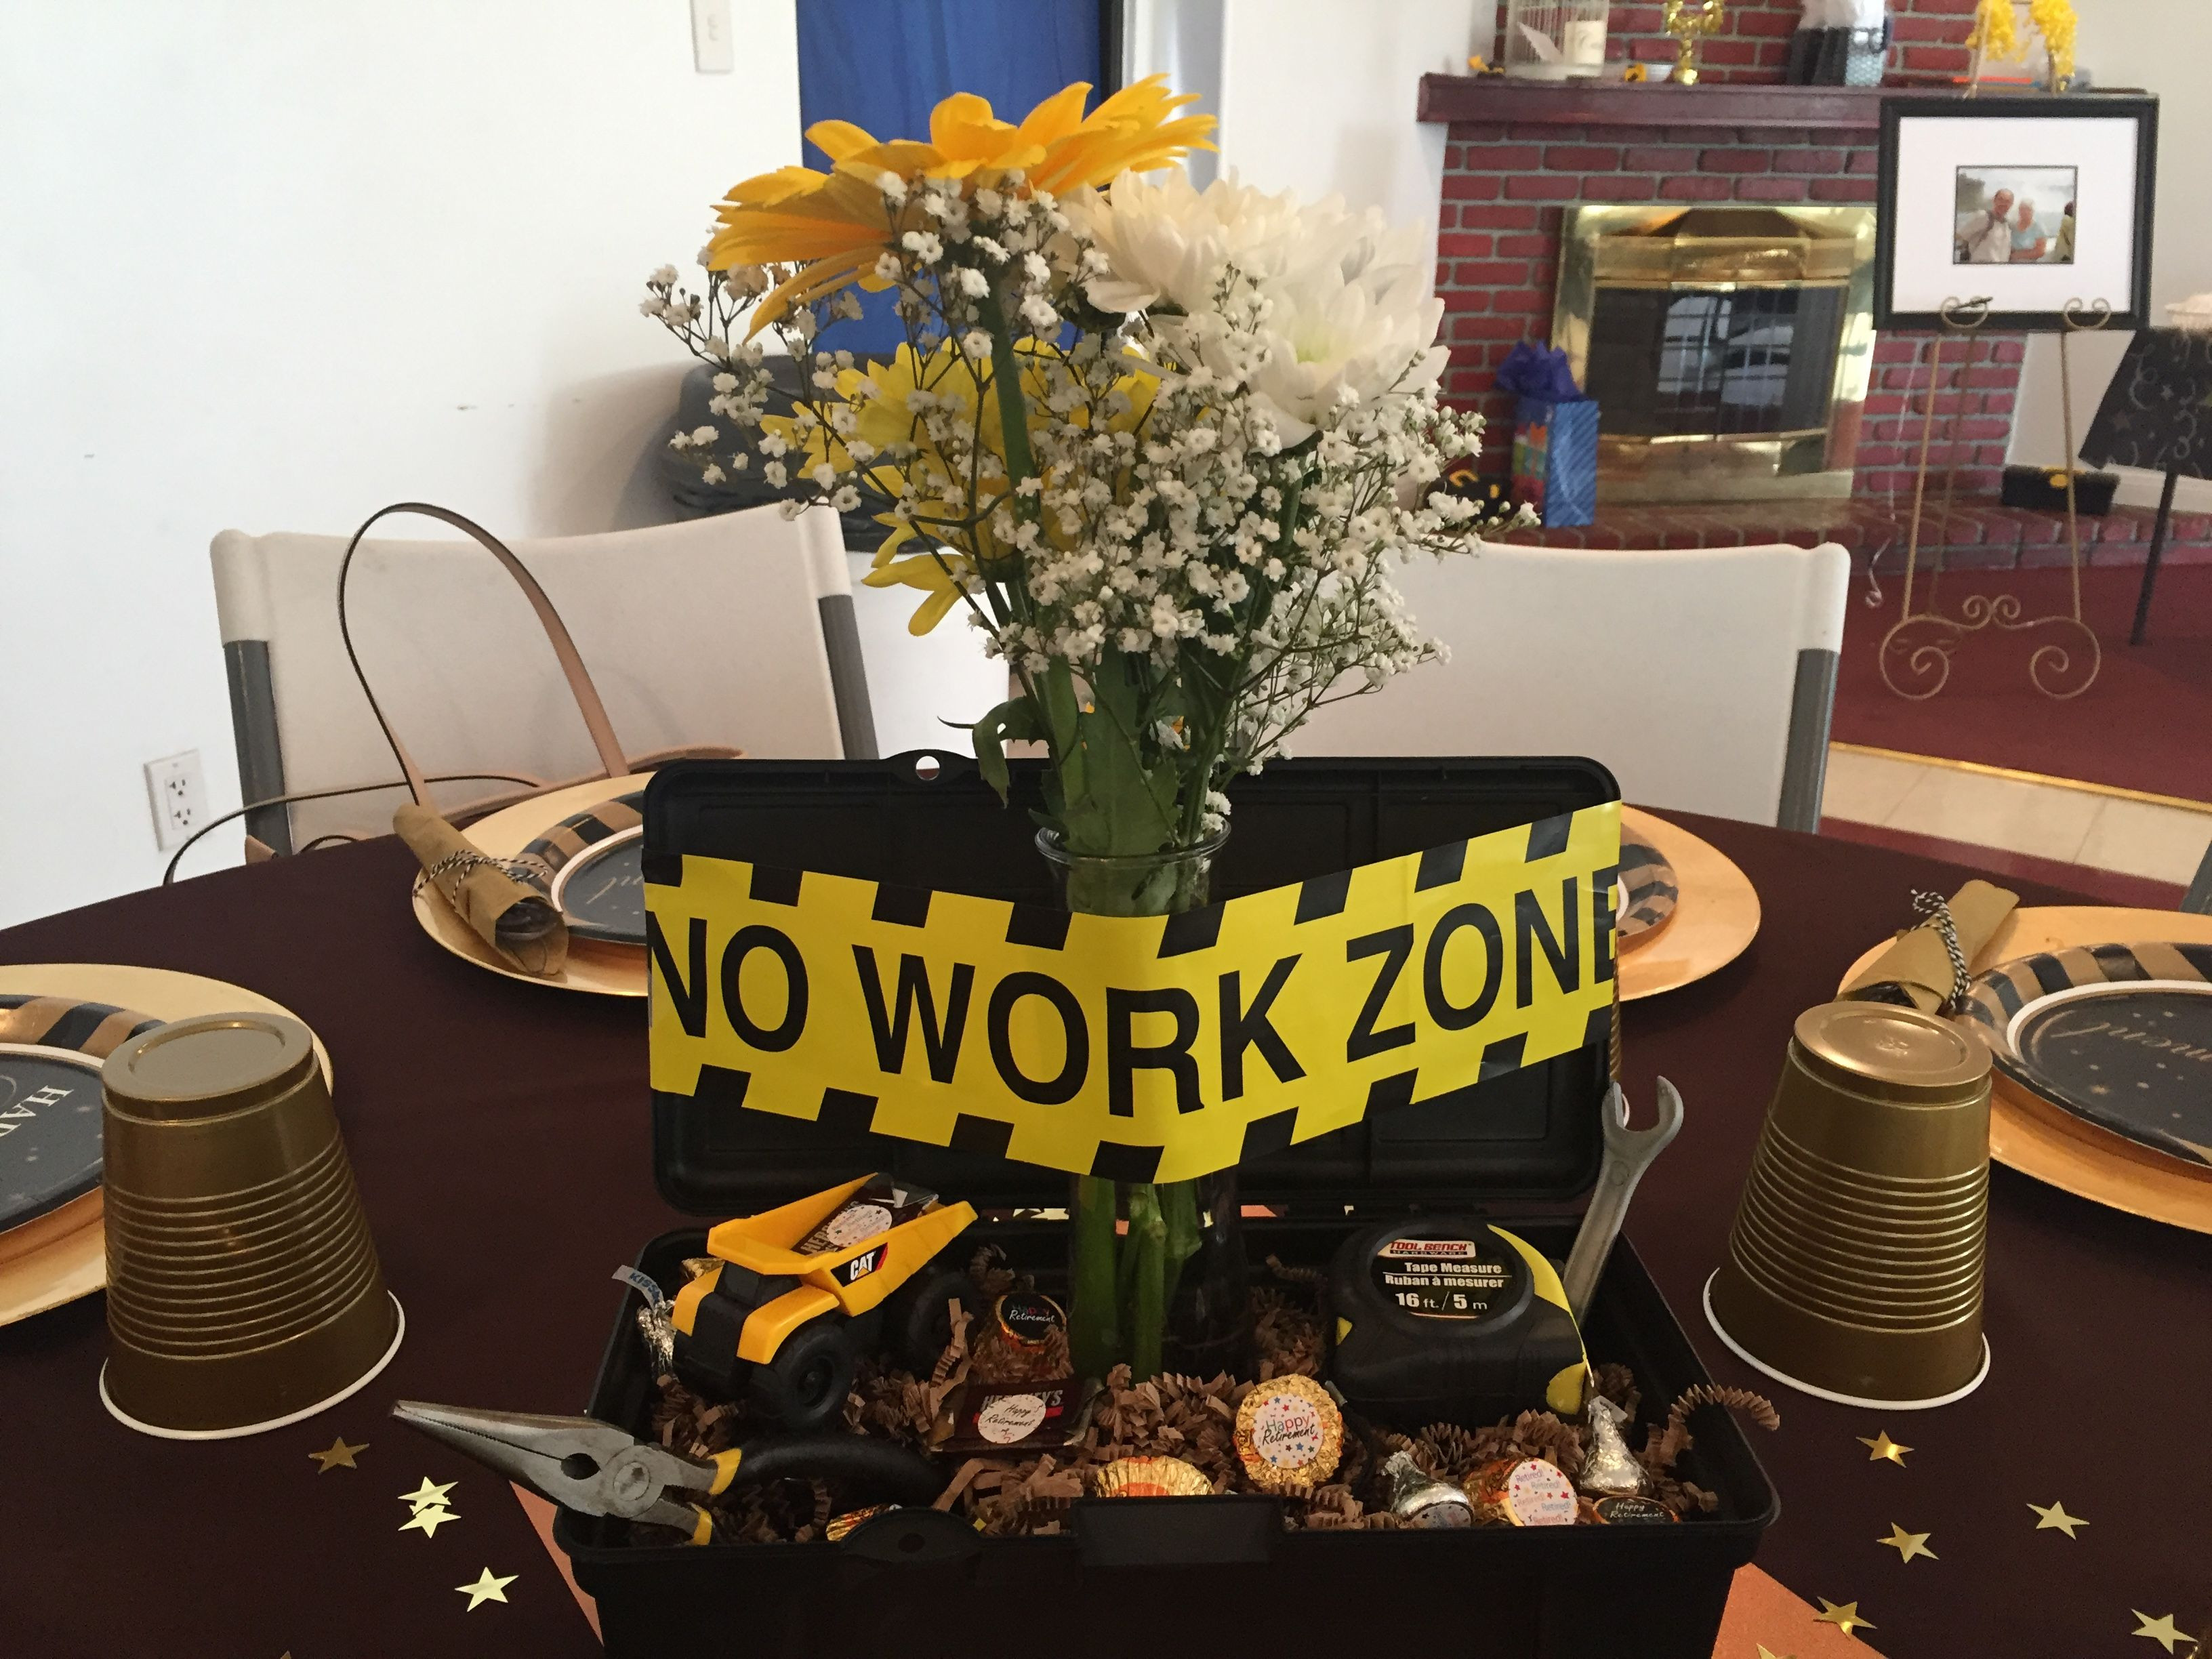 Retirement Party Table Decorations Ideas
 I couldn t find a retirement party centerpiece for a